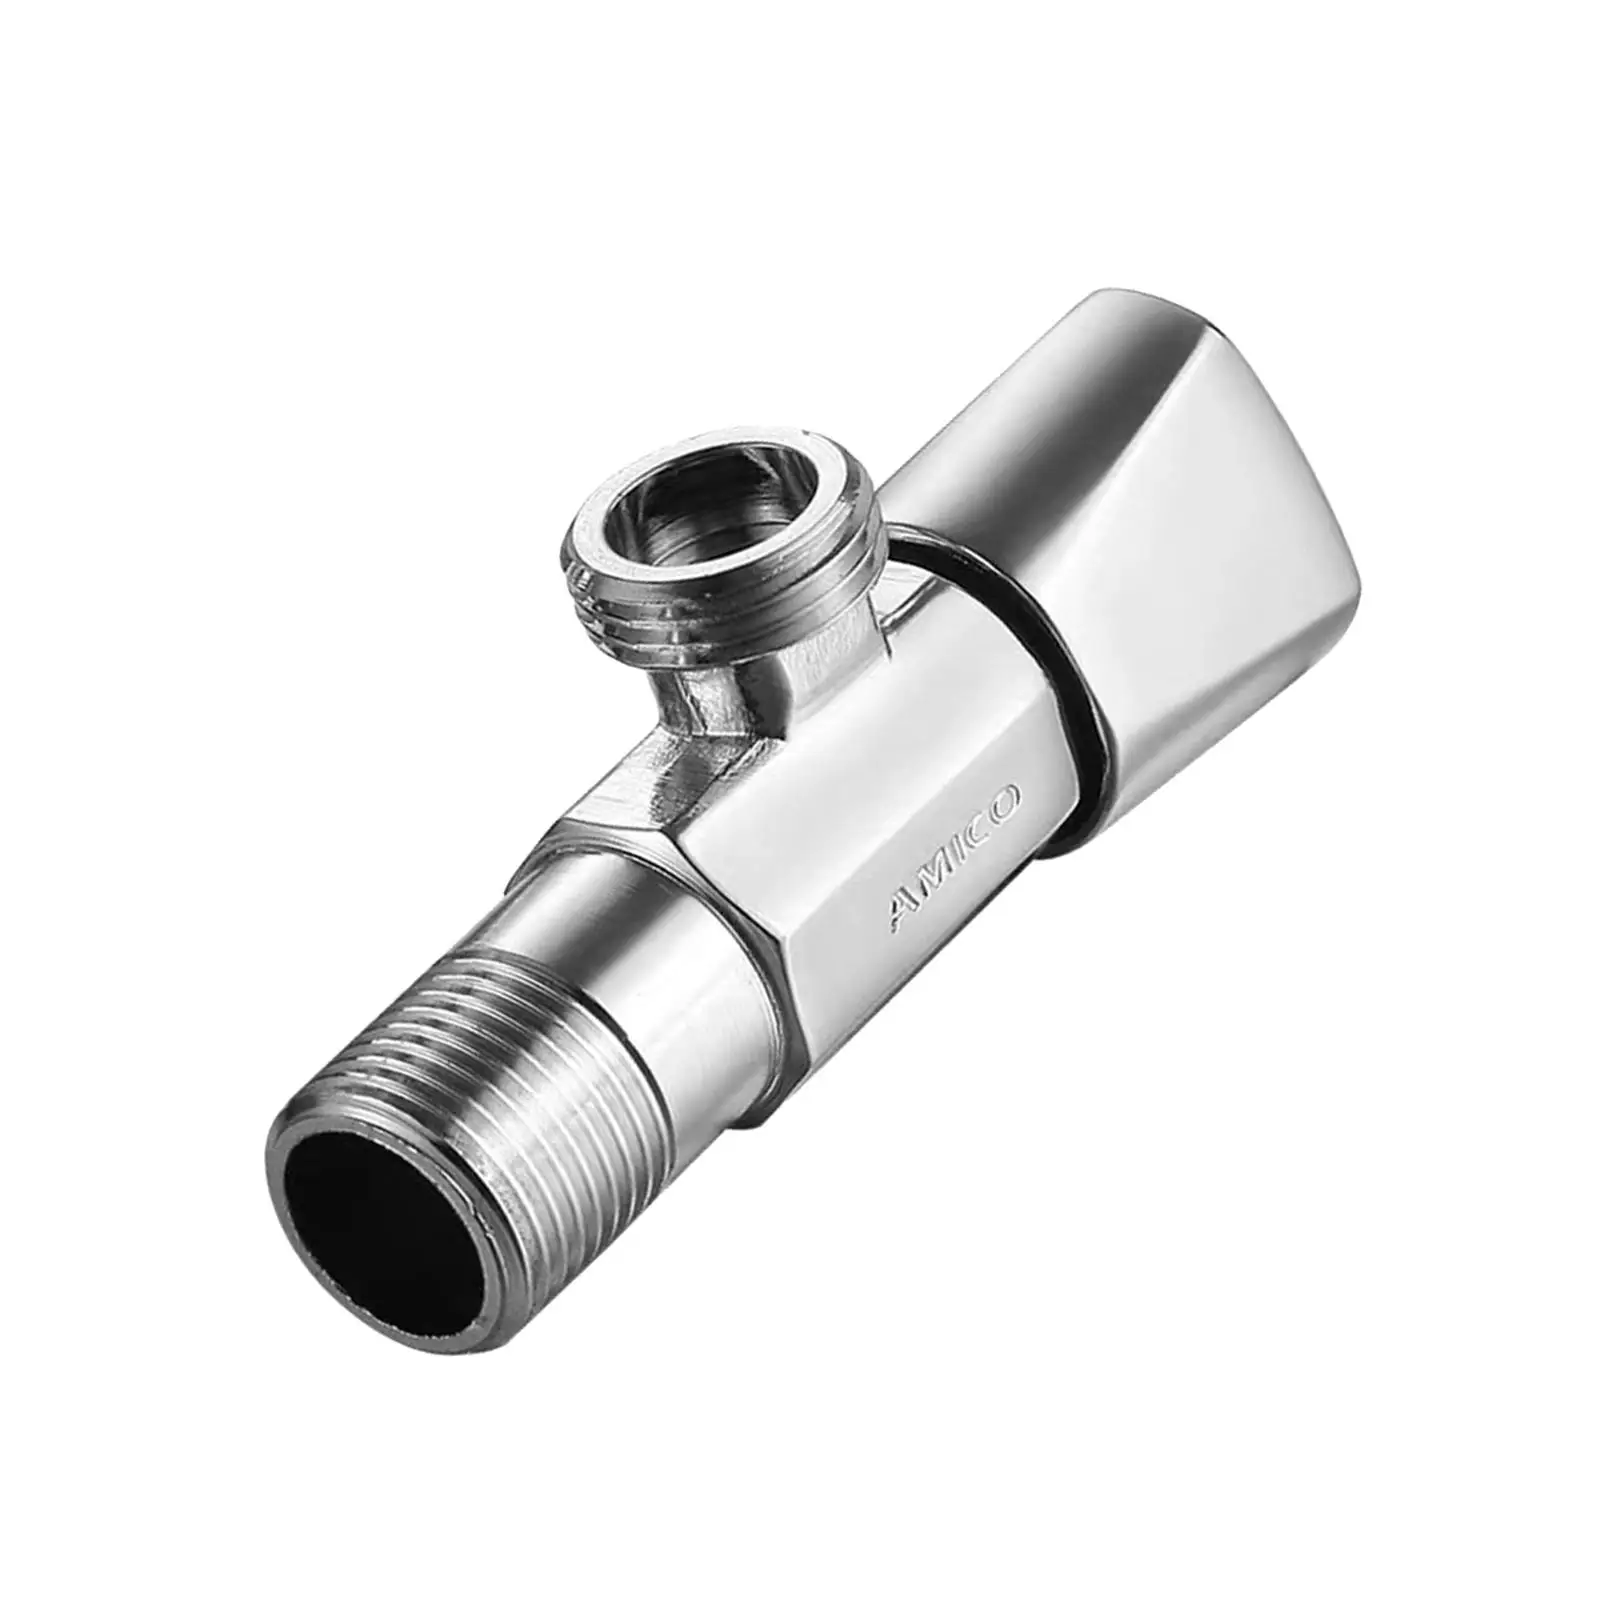 Compression Angle Valve Turn Water Angle Stop Valve for Toilet Supply Faucet